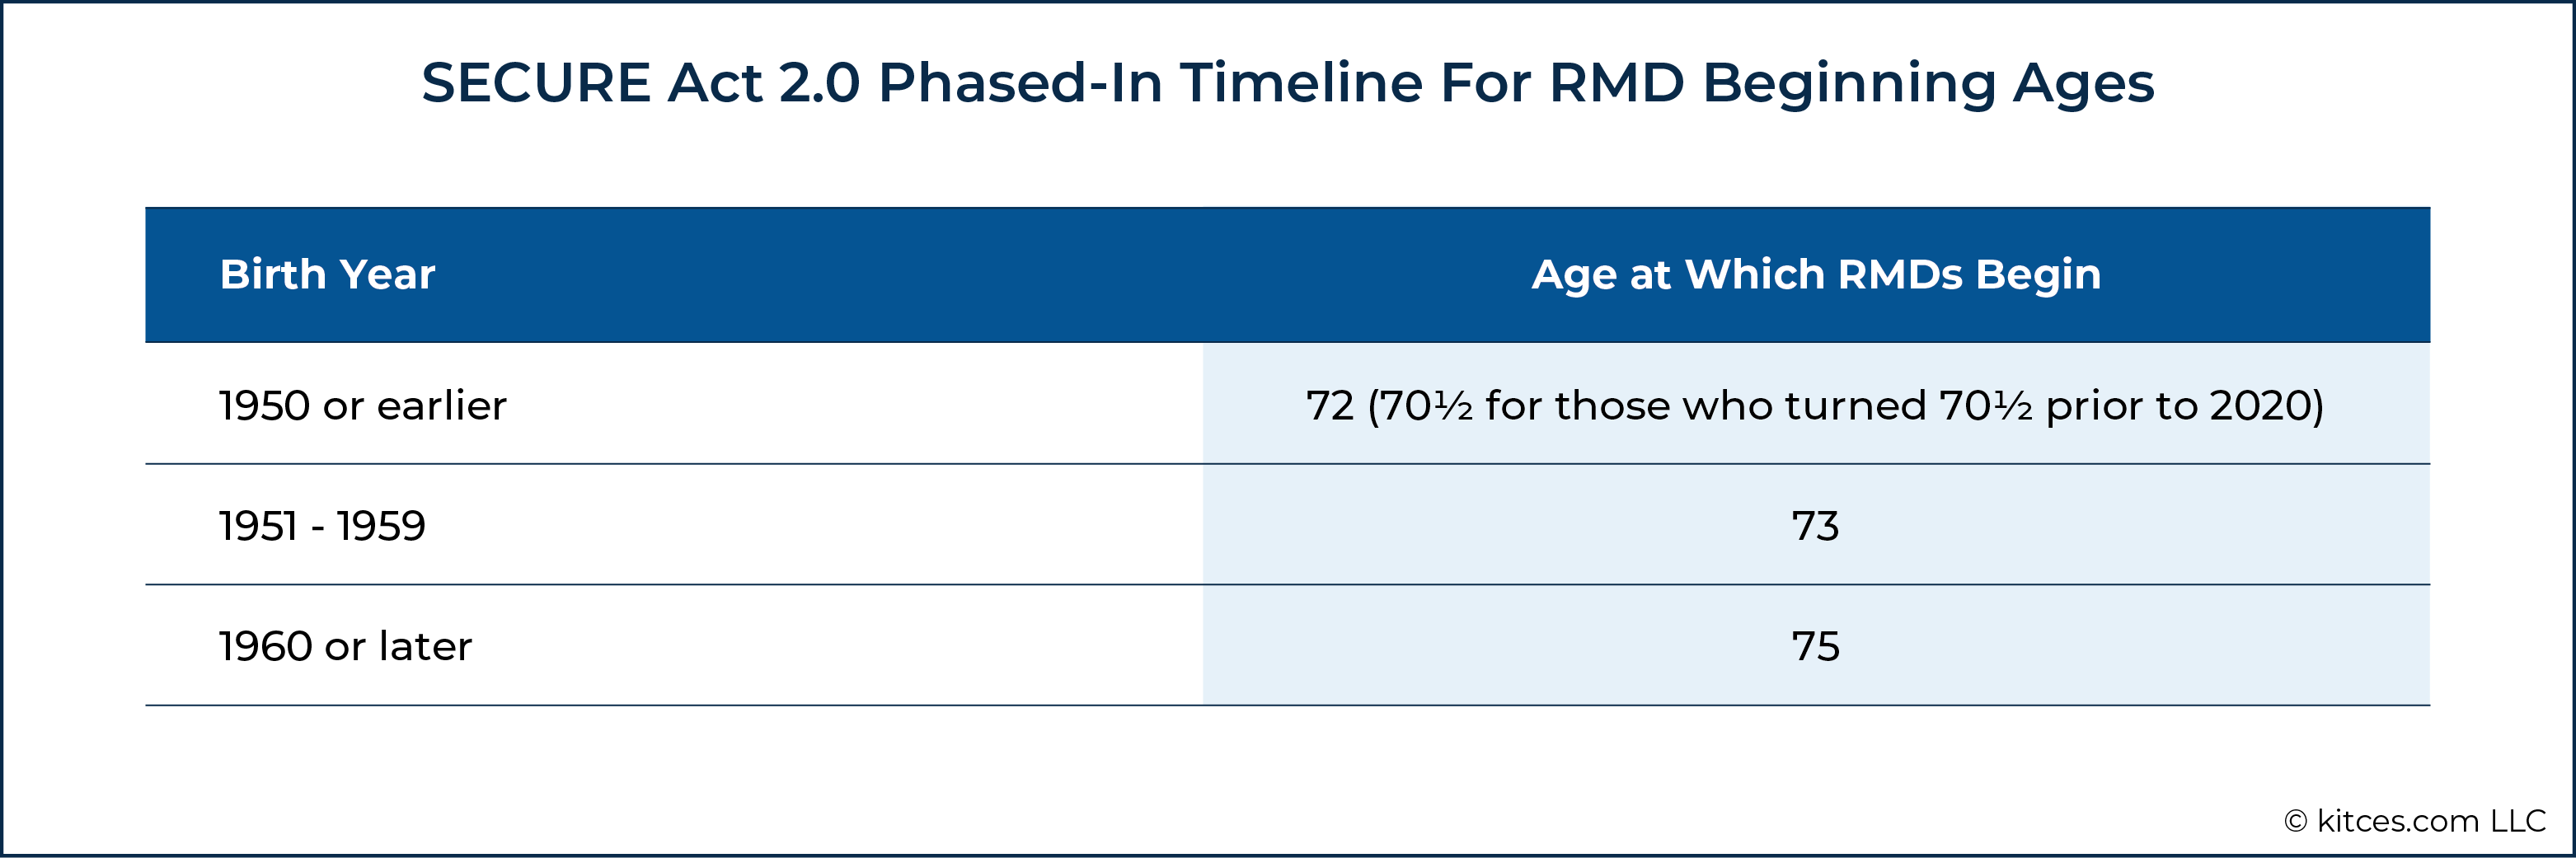 01 SECURE Act 2.0 Phased In Timeline For RMD Beginning Ages 1 